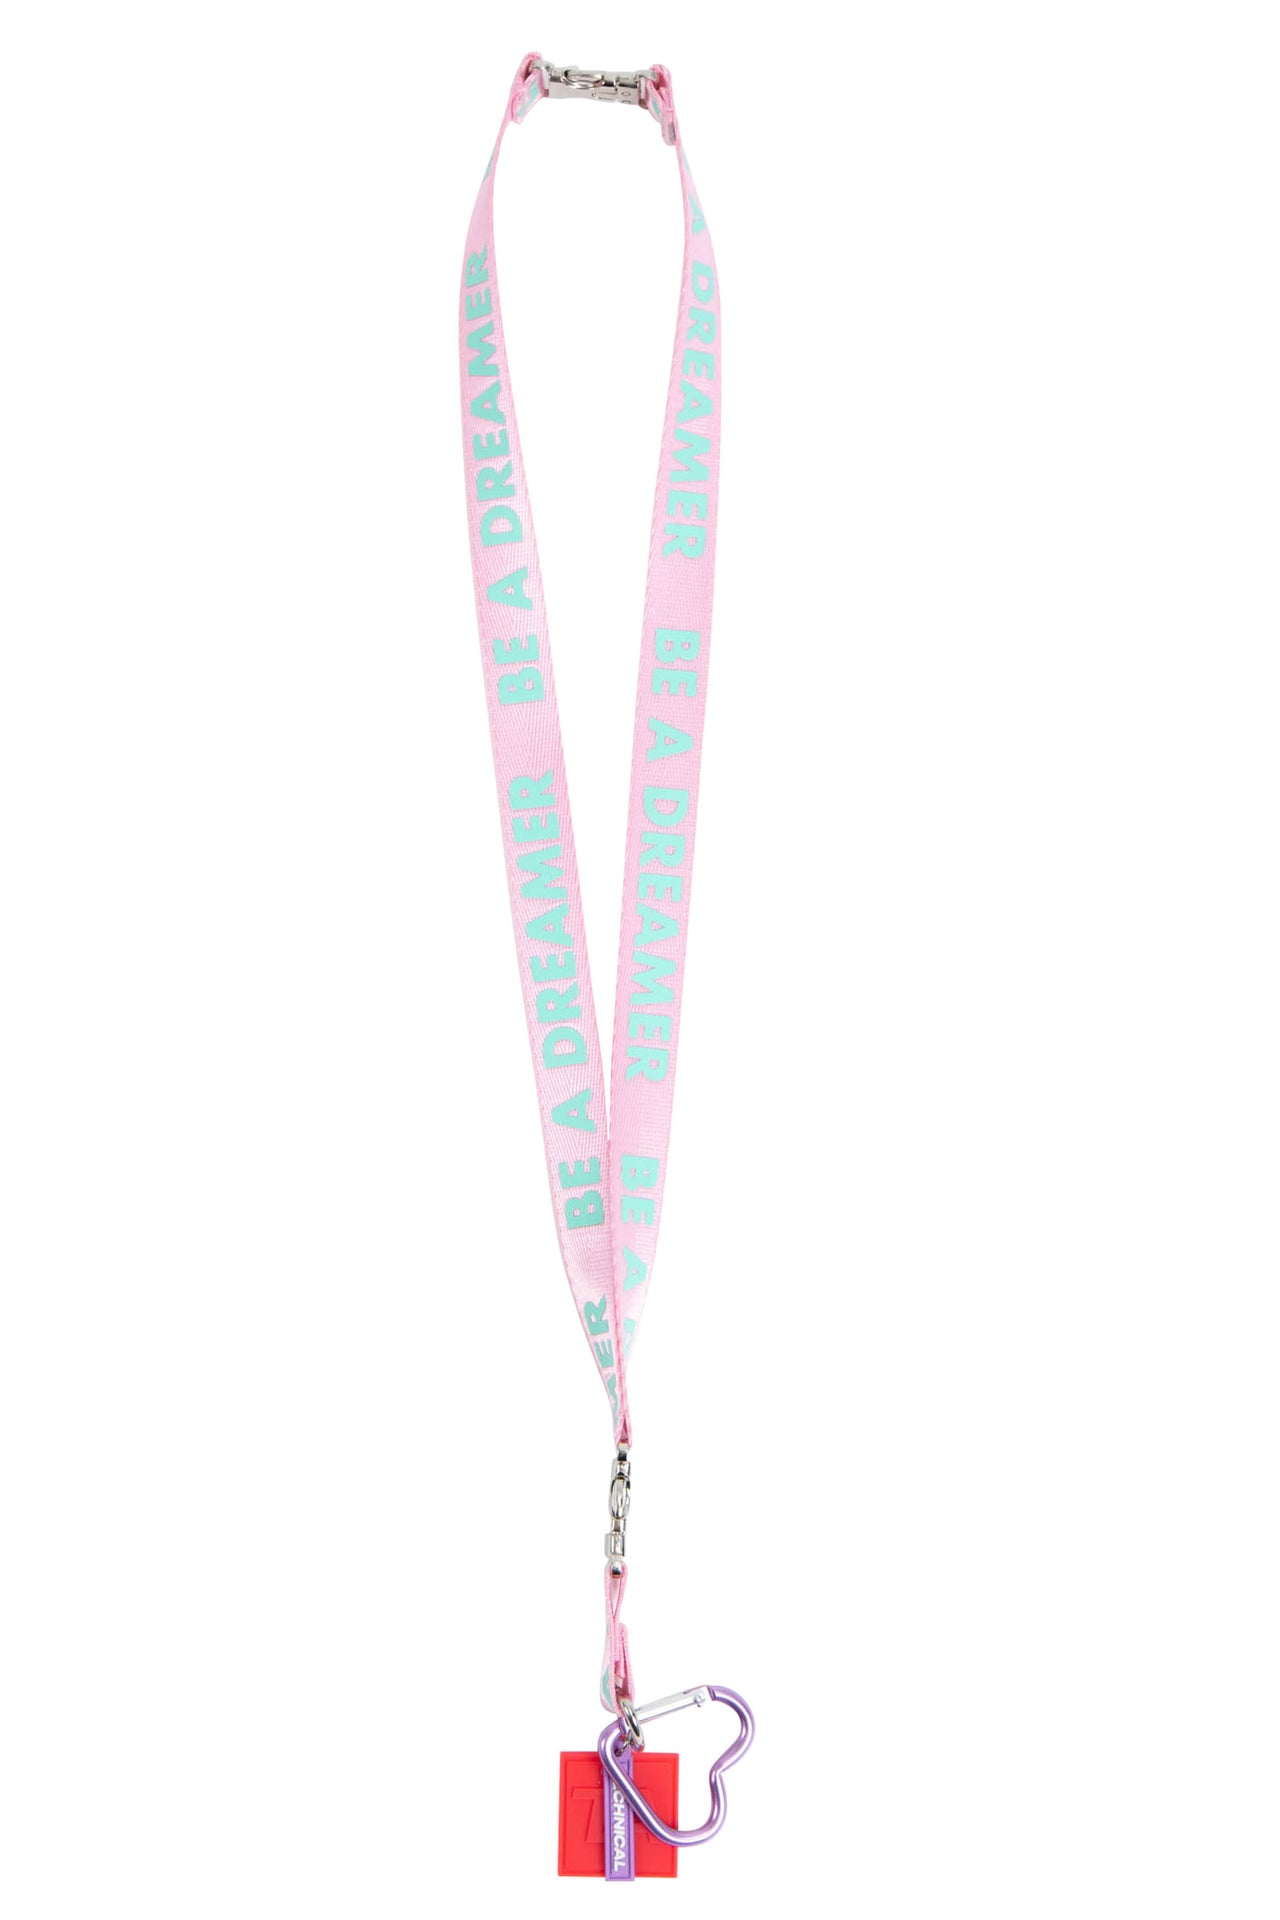 GLOSSY TECHNICAL LANYARD - LIGHT PINK "BE A DREAMER" ⚡